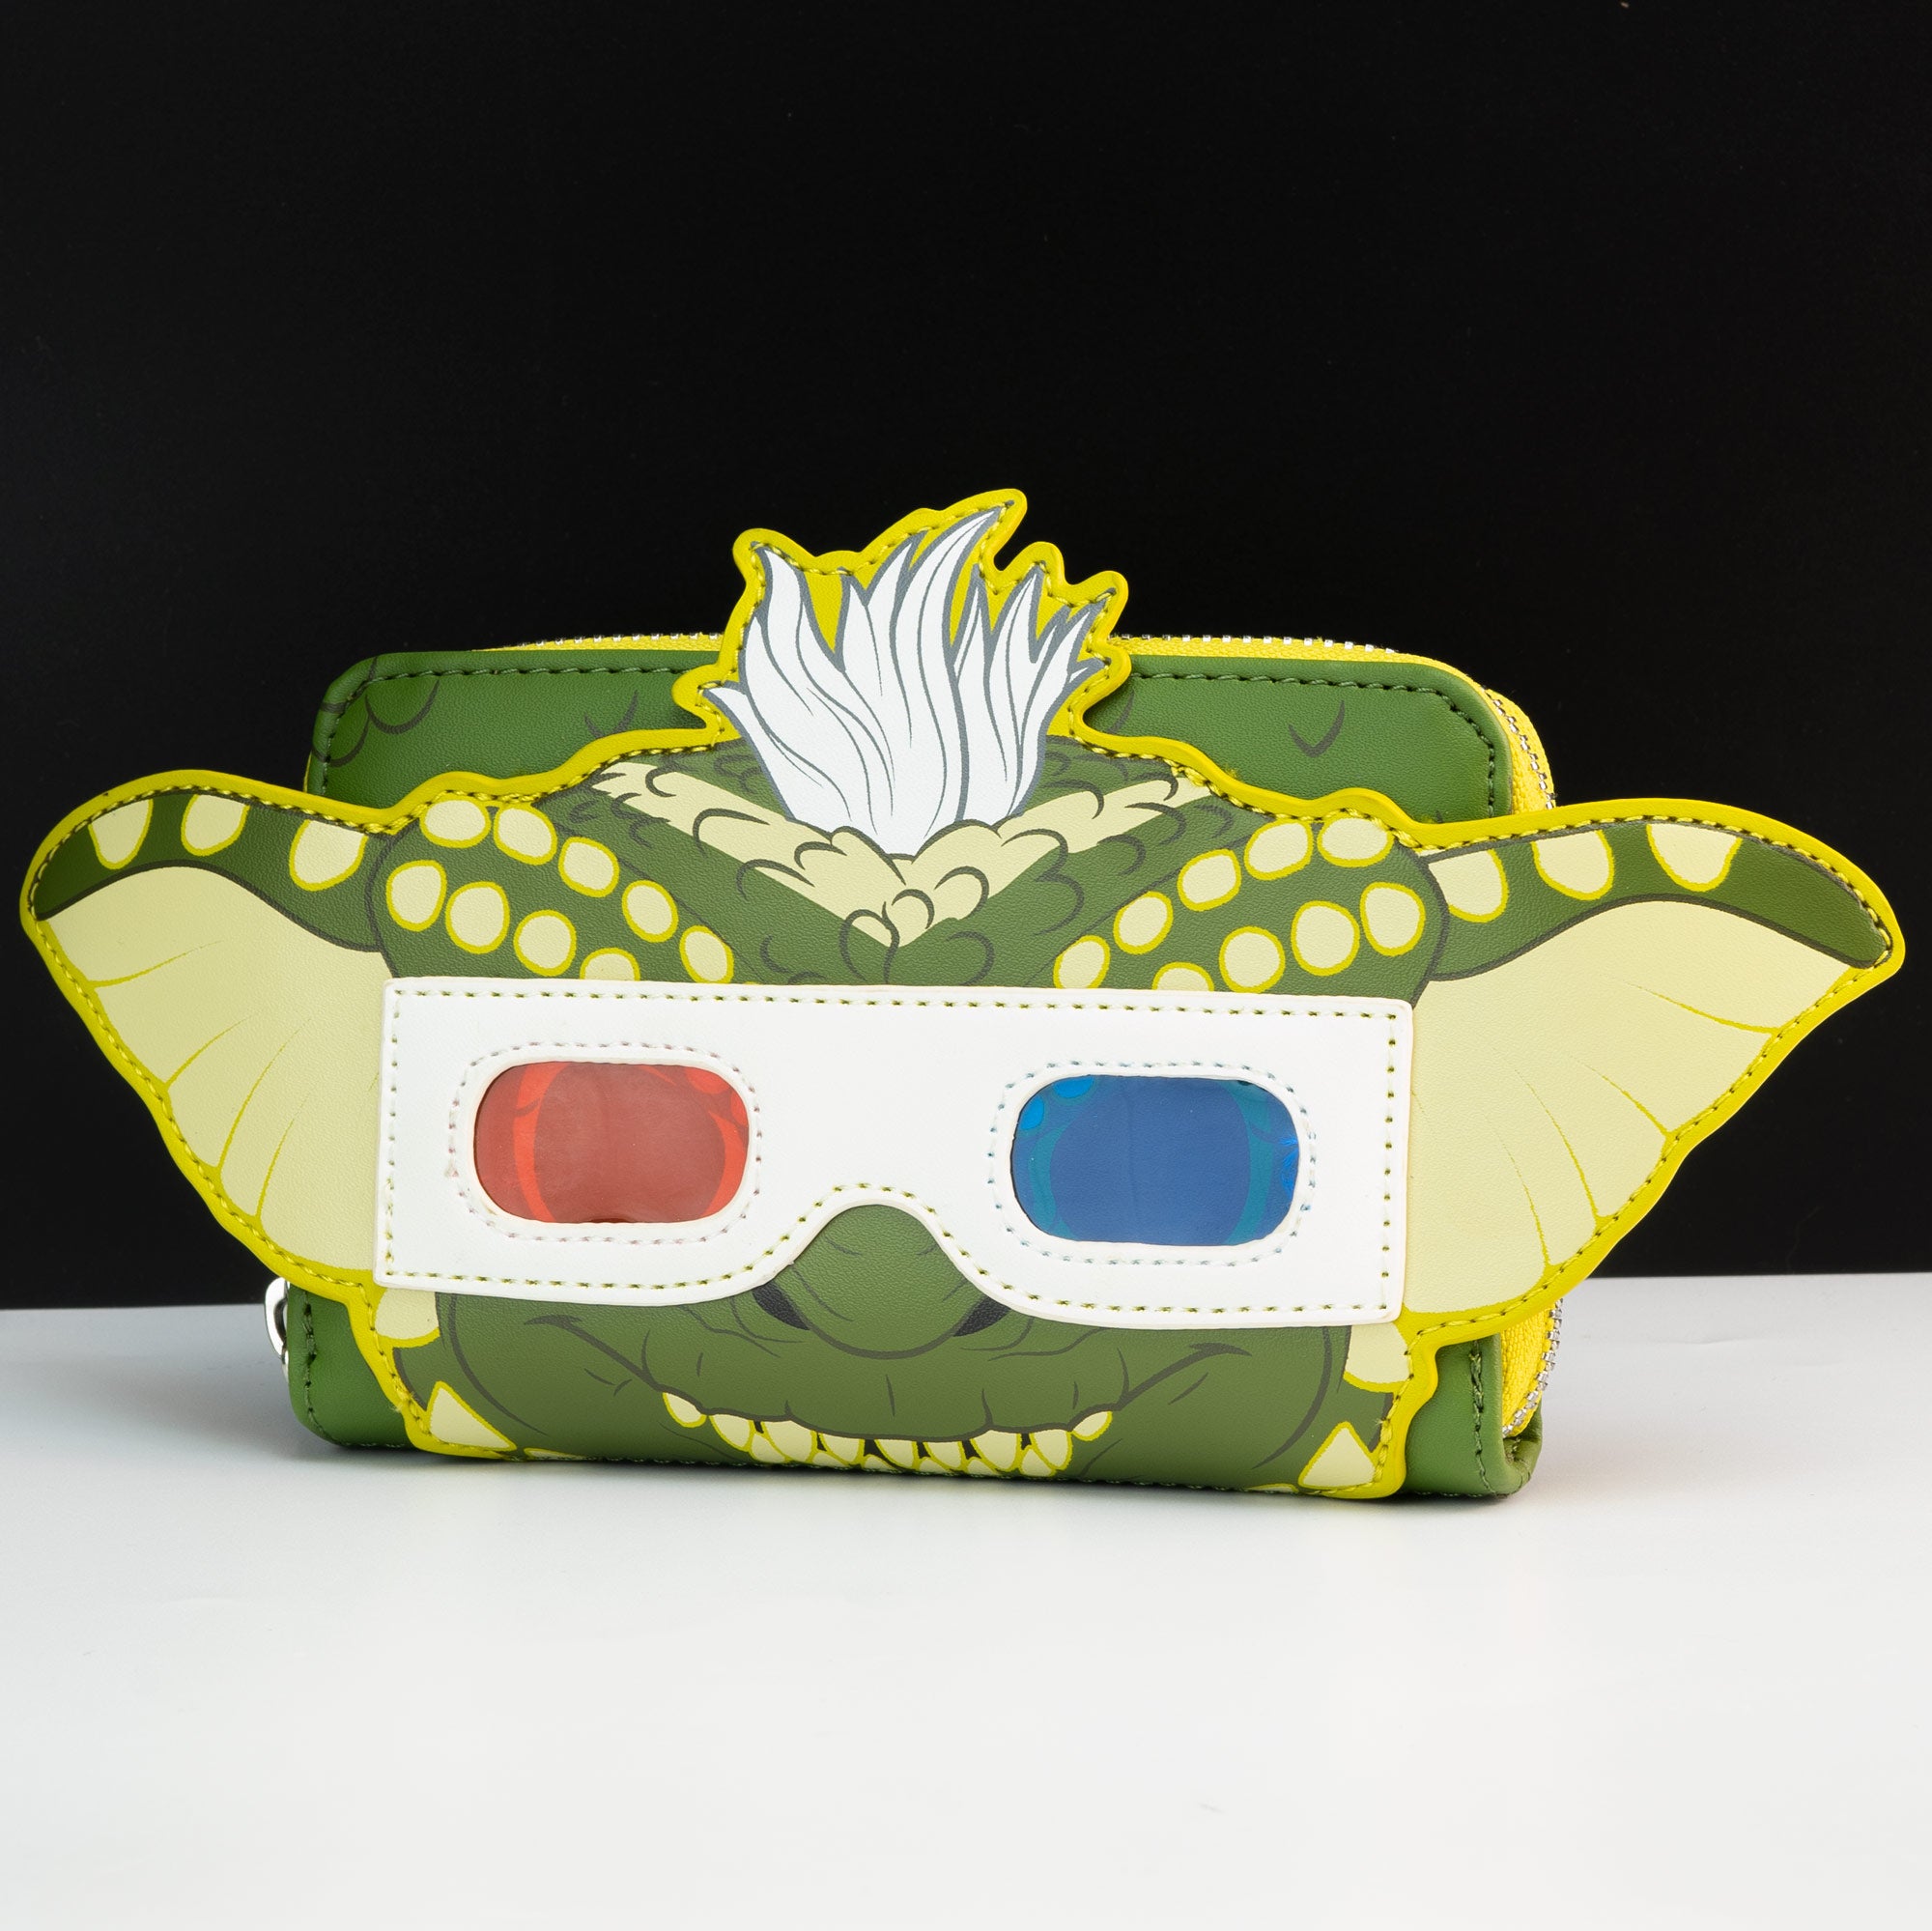 Loungefly x Gremlins Stripe with Glasses Cosplay Purse